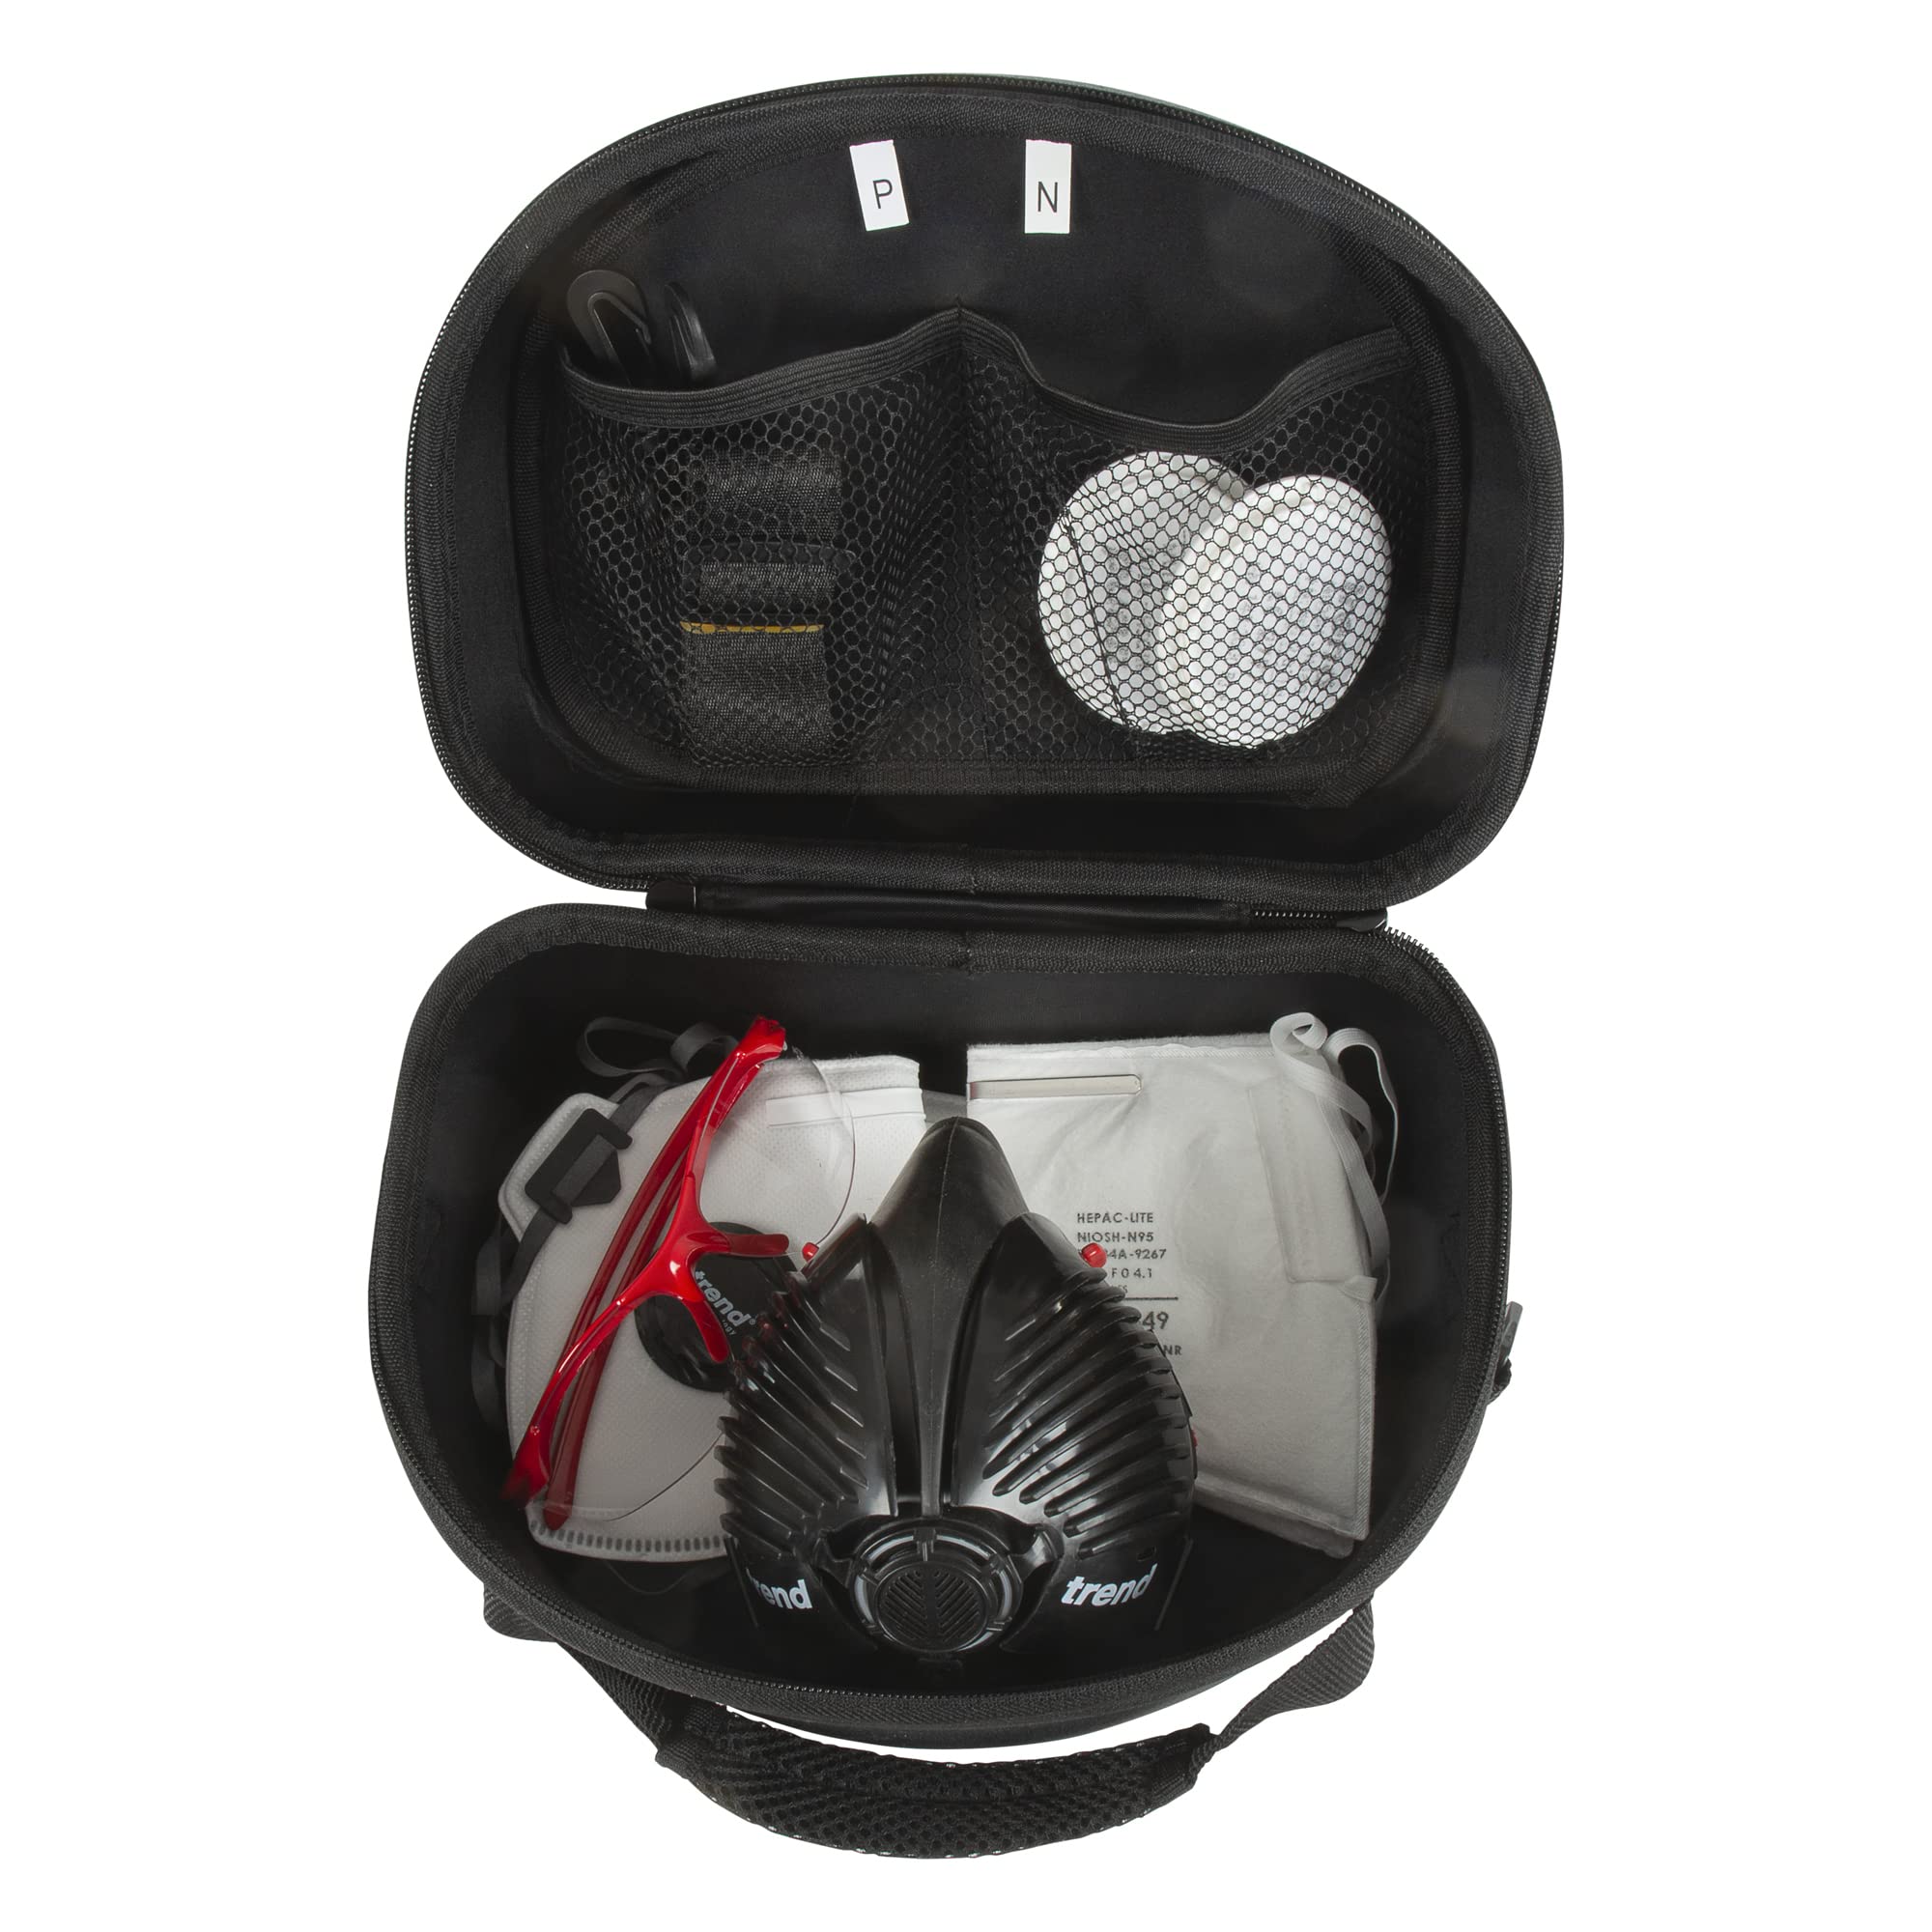 Trend Large Multipurpose Storage Case for PPE, RPE Masks, Air Filters & Accessories, STE/VIS/2